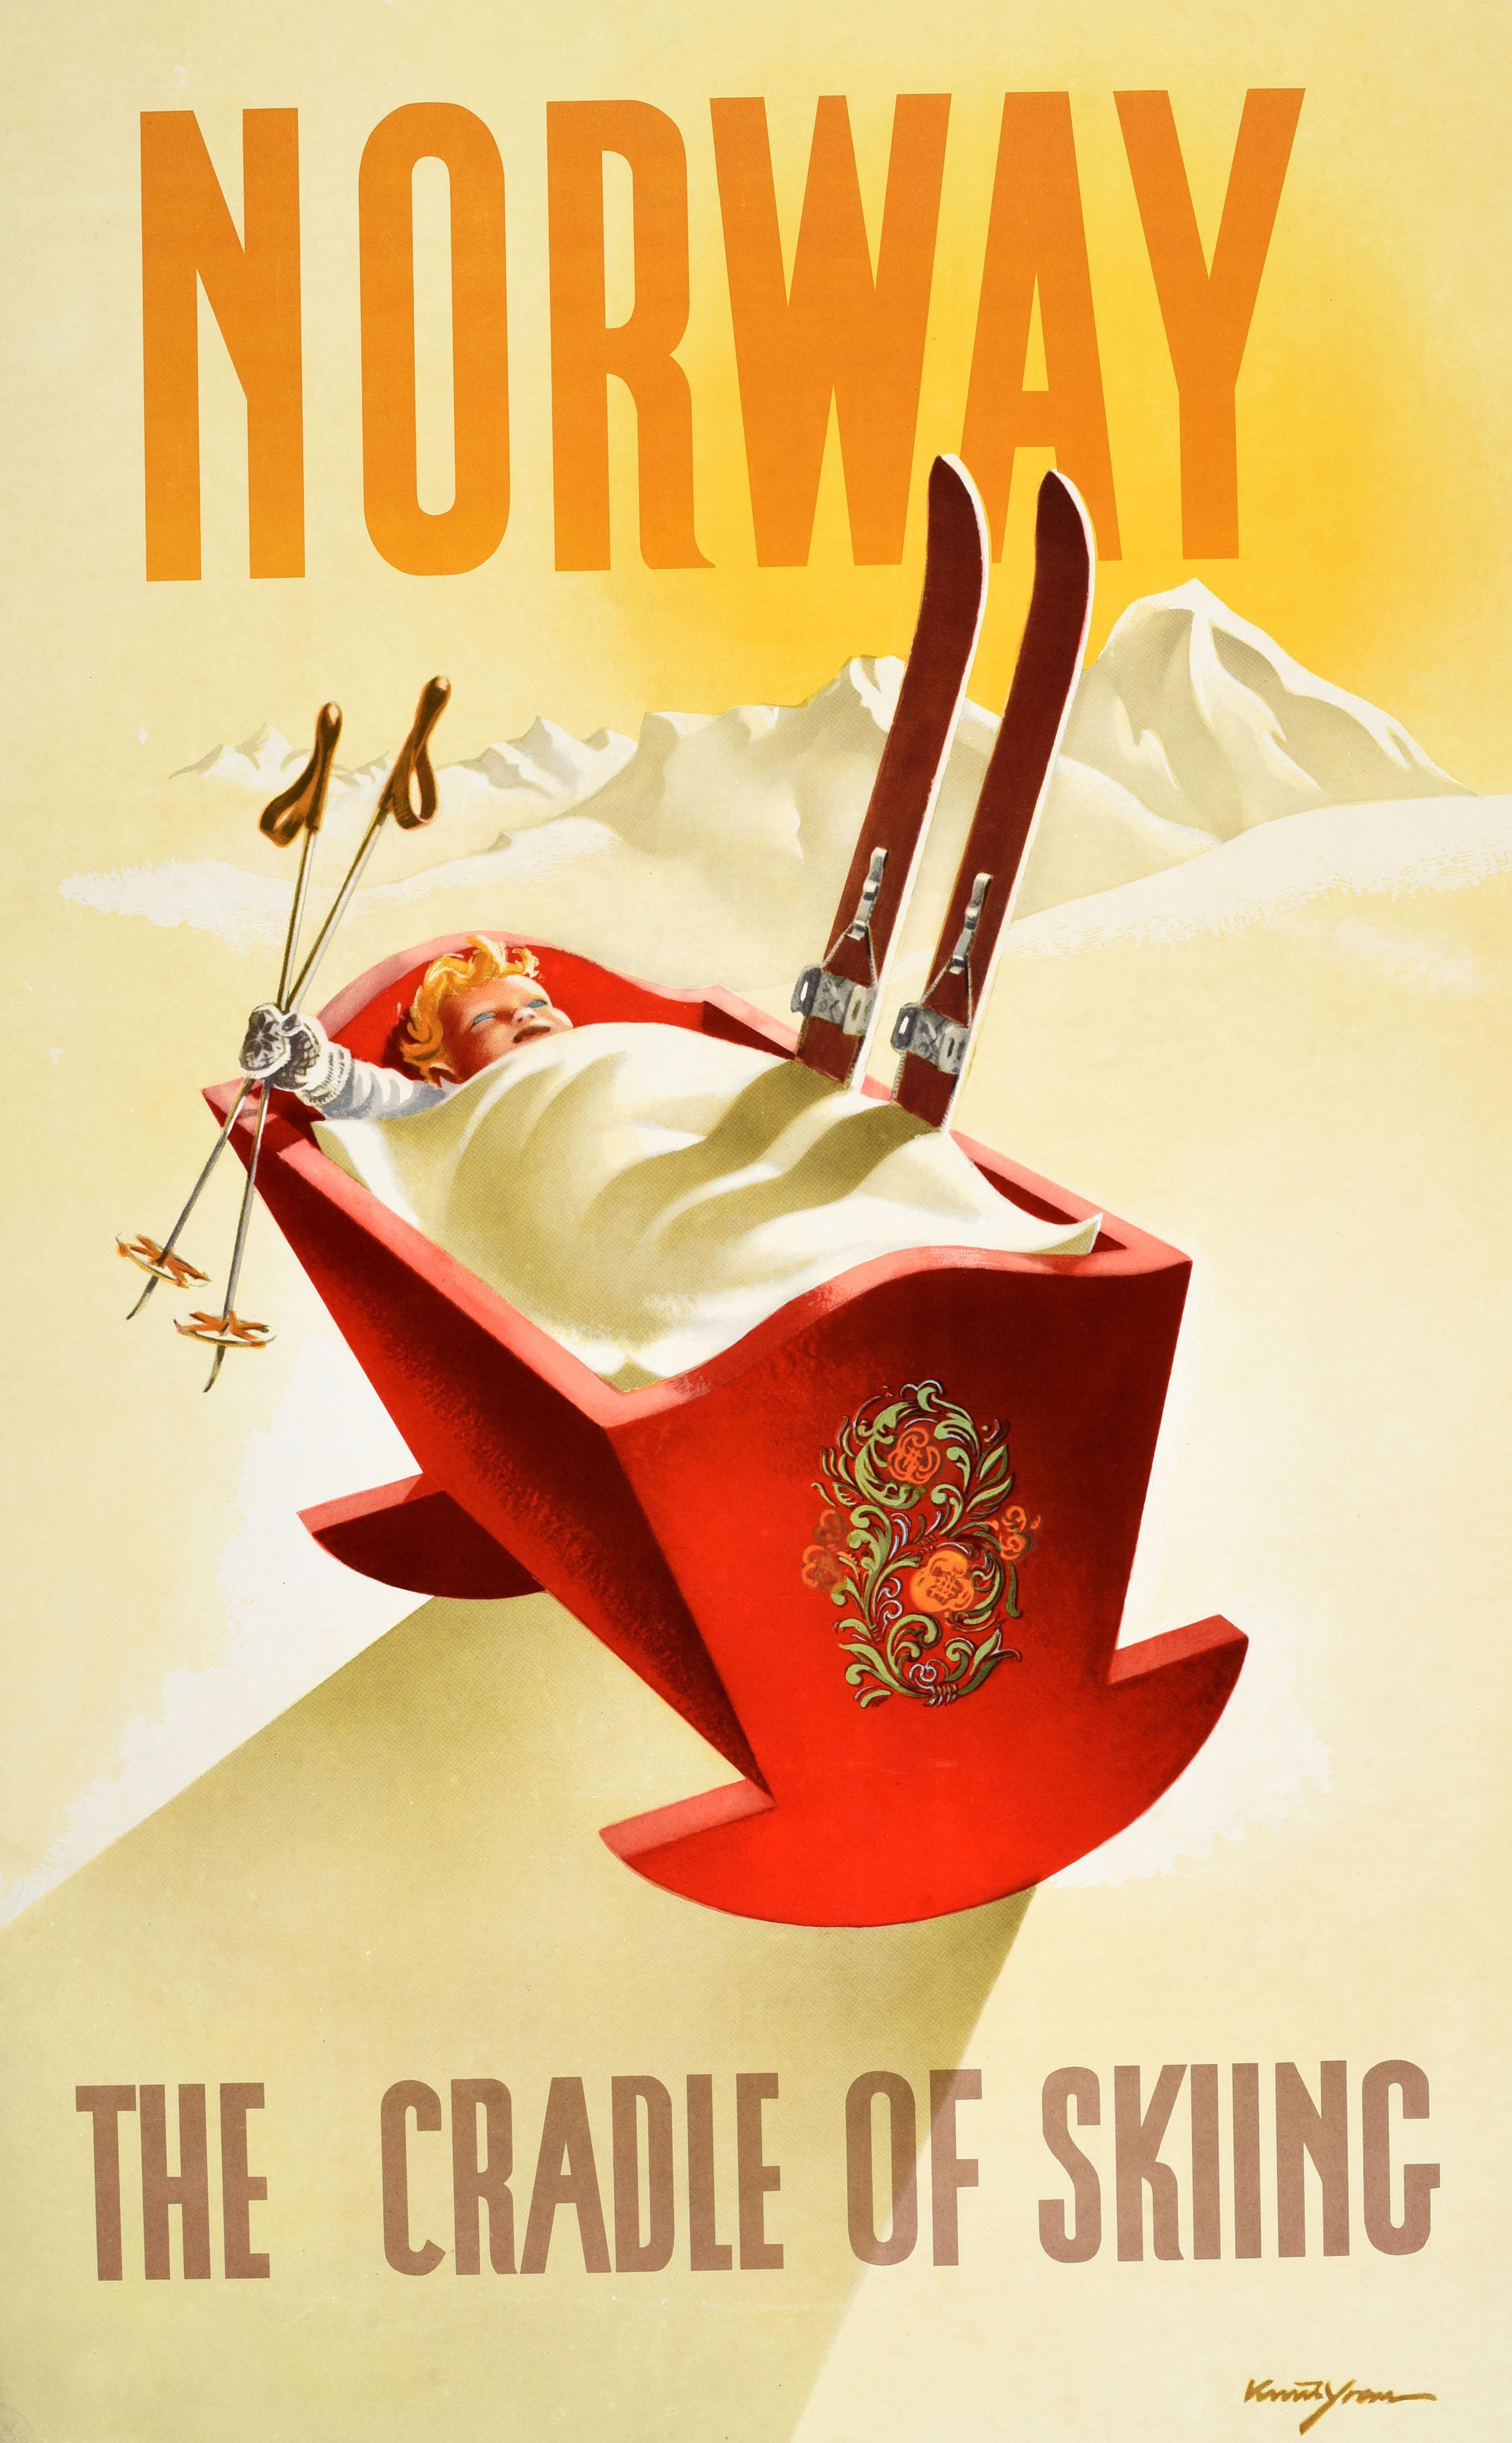 Original vintage ski travel poster for Norway The Cradle of Skiing featuring artwork by Knut Yran (1920-1998) depicting a baby holding ski poles and lying in a traditional decorated red cradle with skis tucked into the blanket on the side, the snow